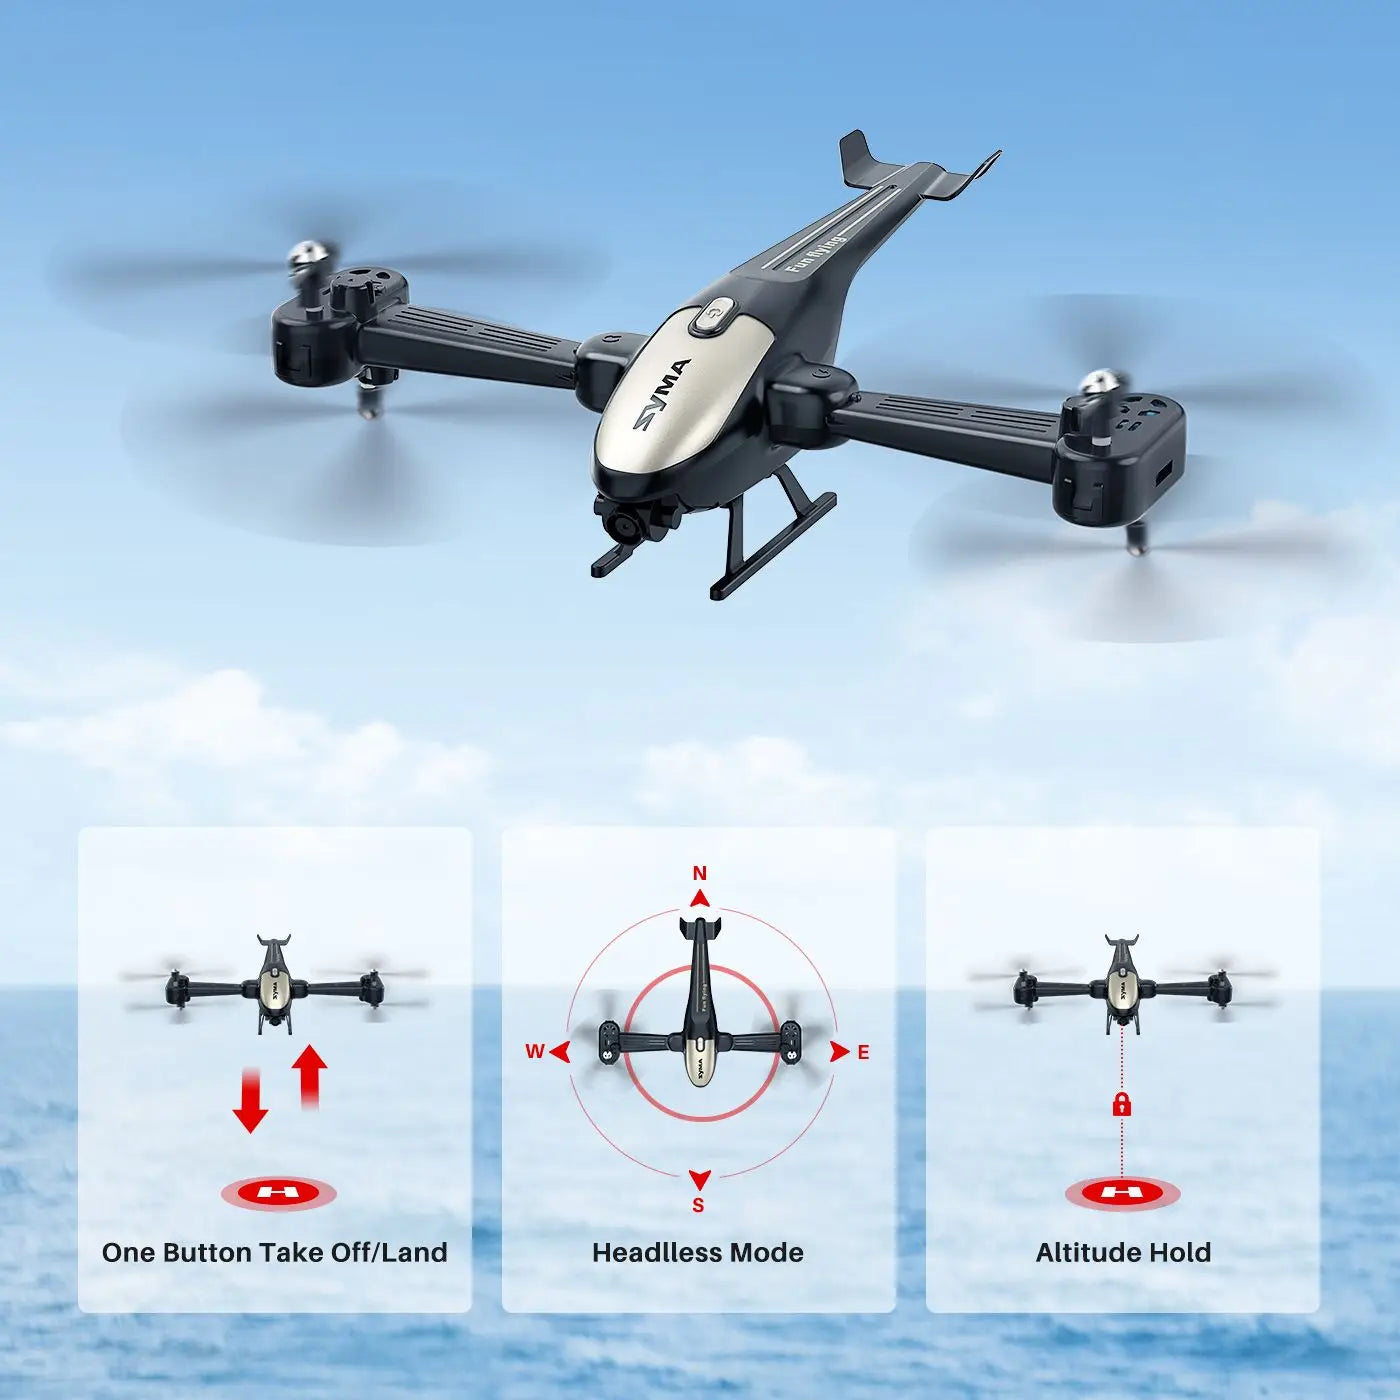 SYMA X700W RC Drone, W ( One Button Take Off/Land Headlless Mode Altitude Hold